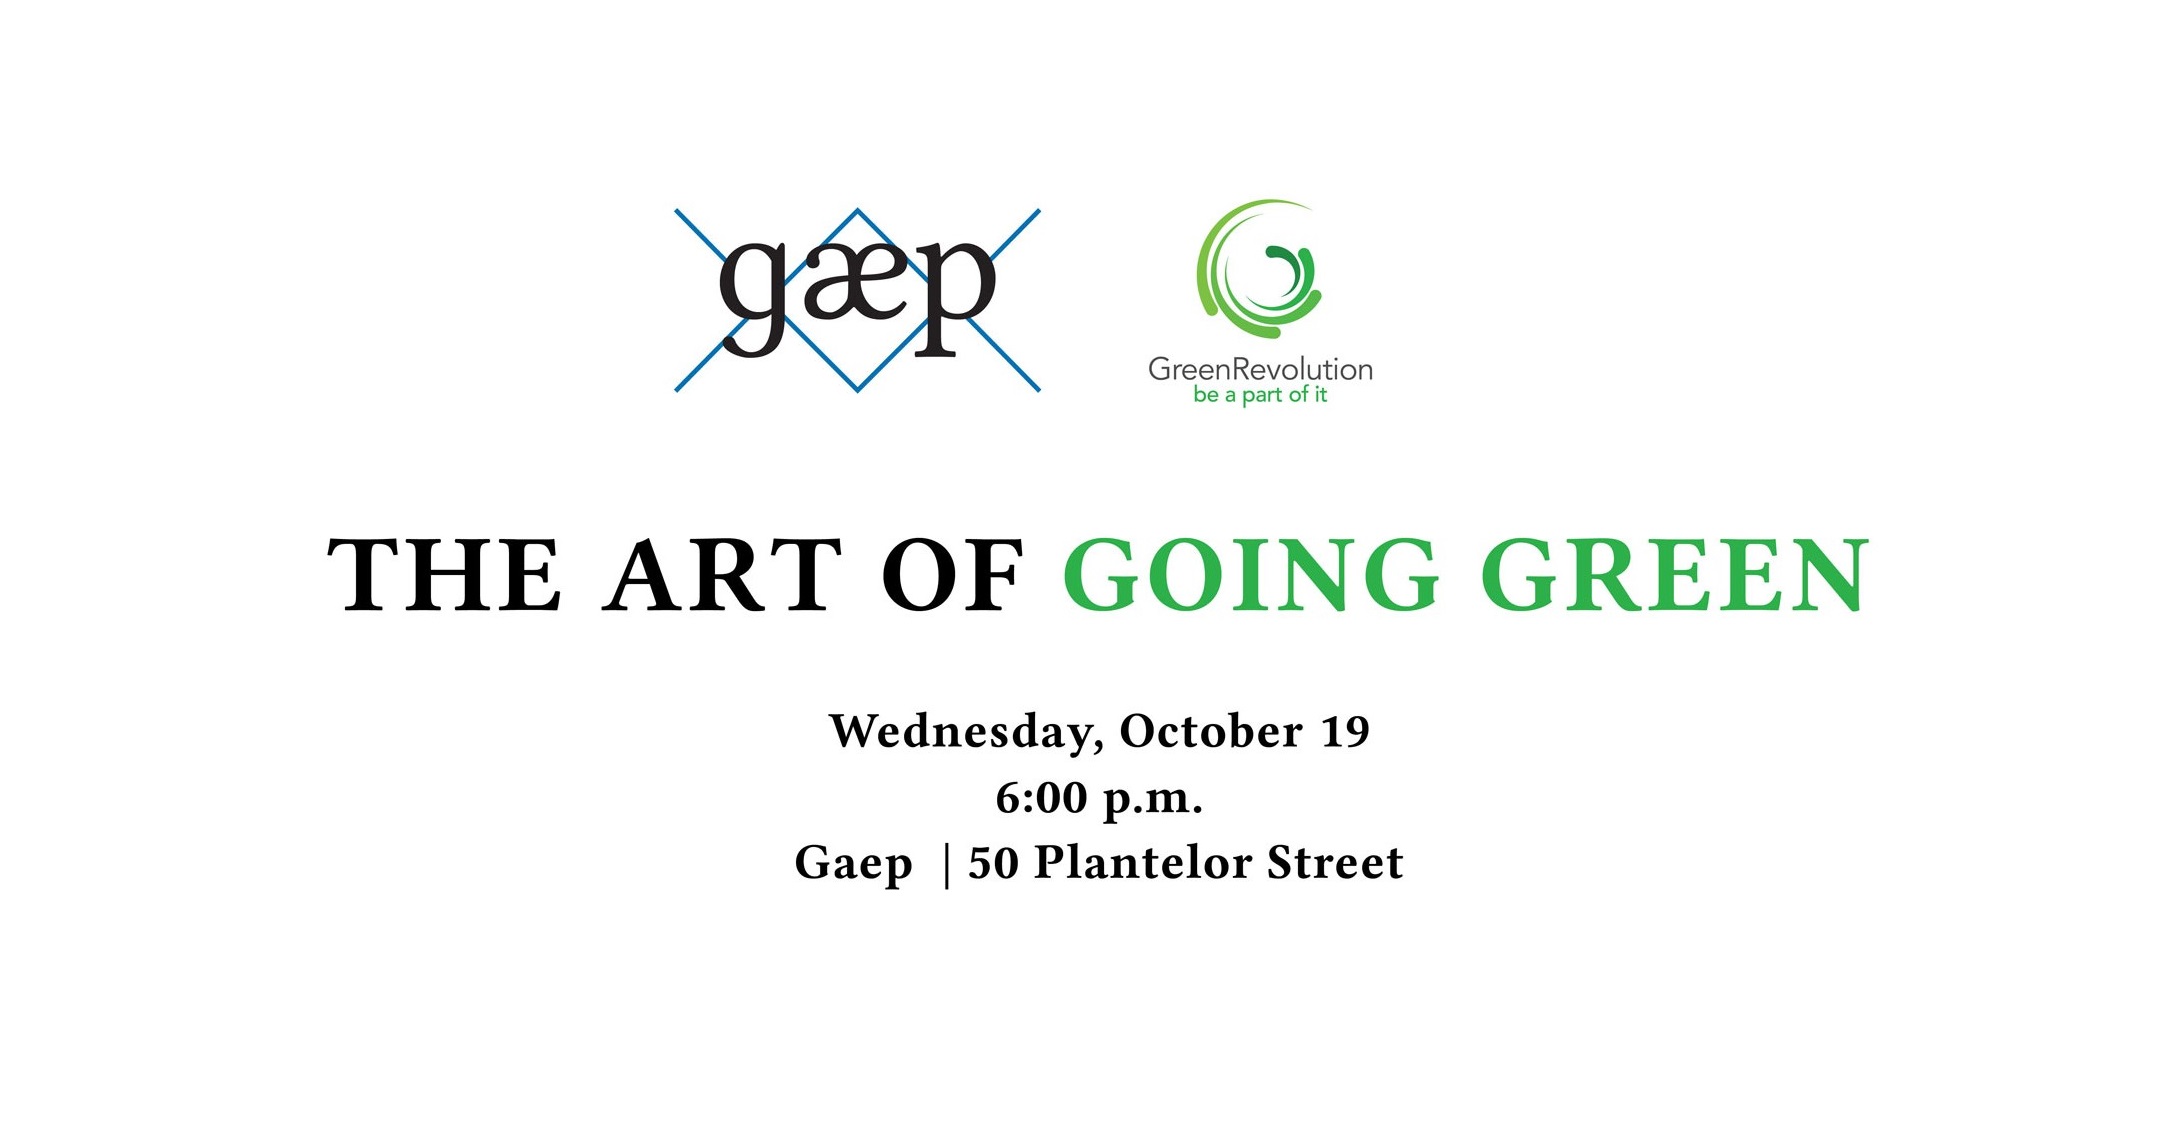 Supported event: The Art of Going Green by GAEP & Green Revolution